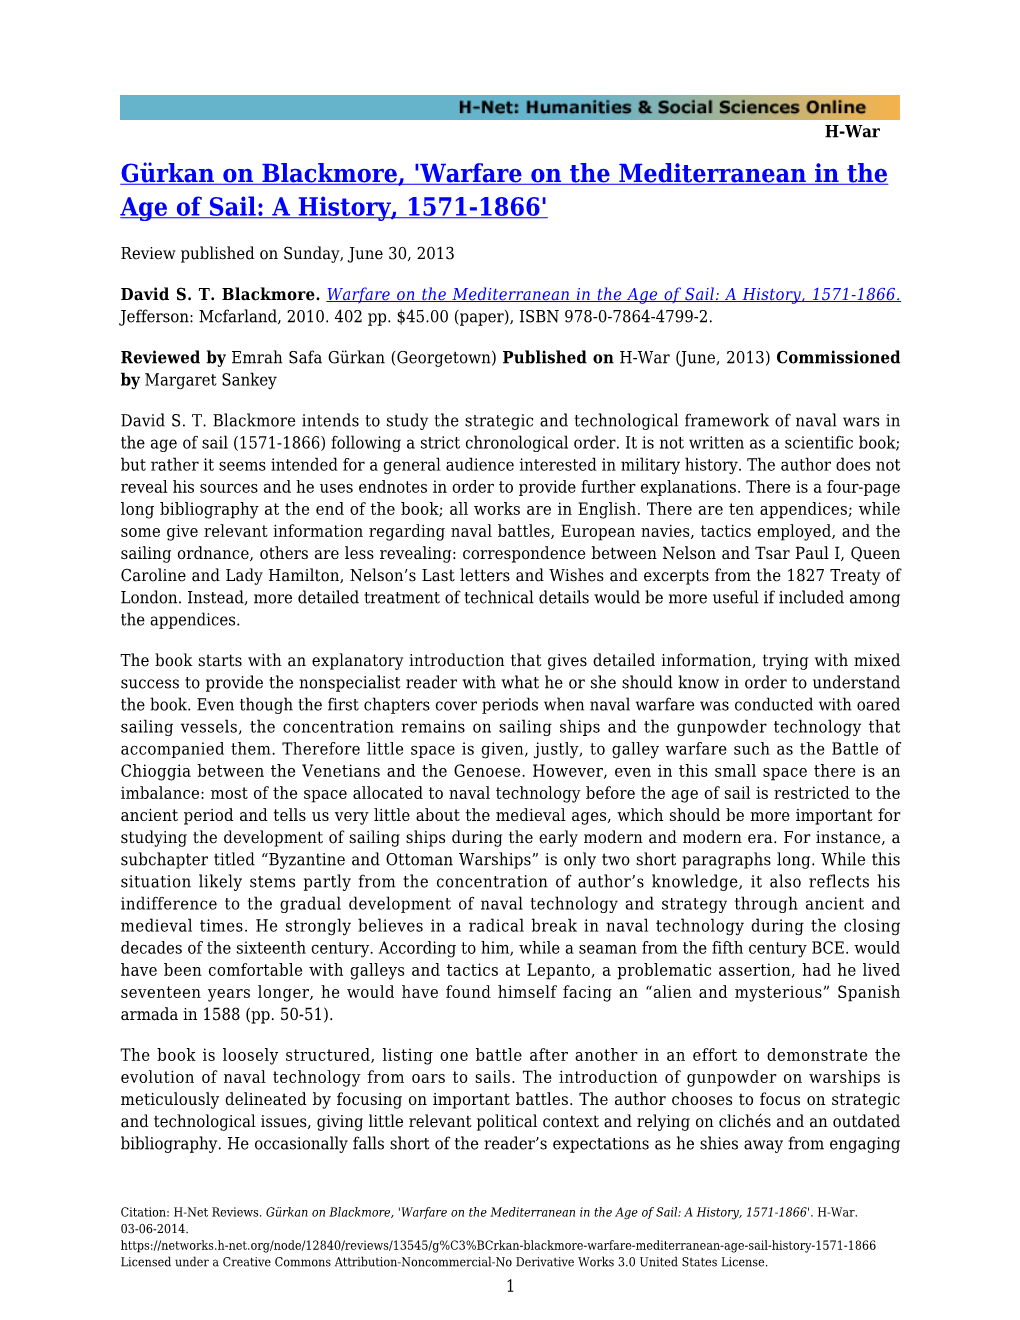 Gürkan on Blackmore, 'Warfare on the Mediterranean in the Age of Sail: a History, 1571-1866'